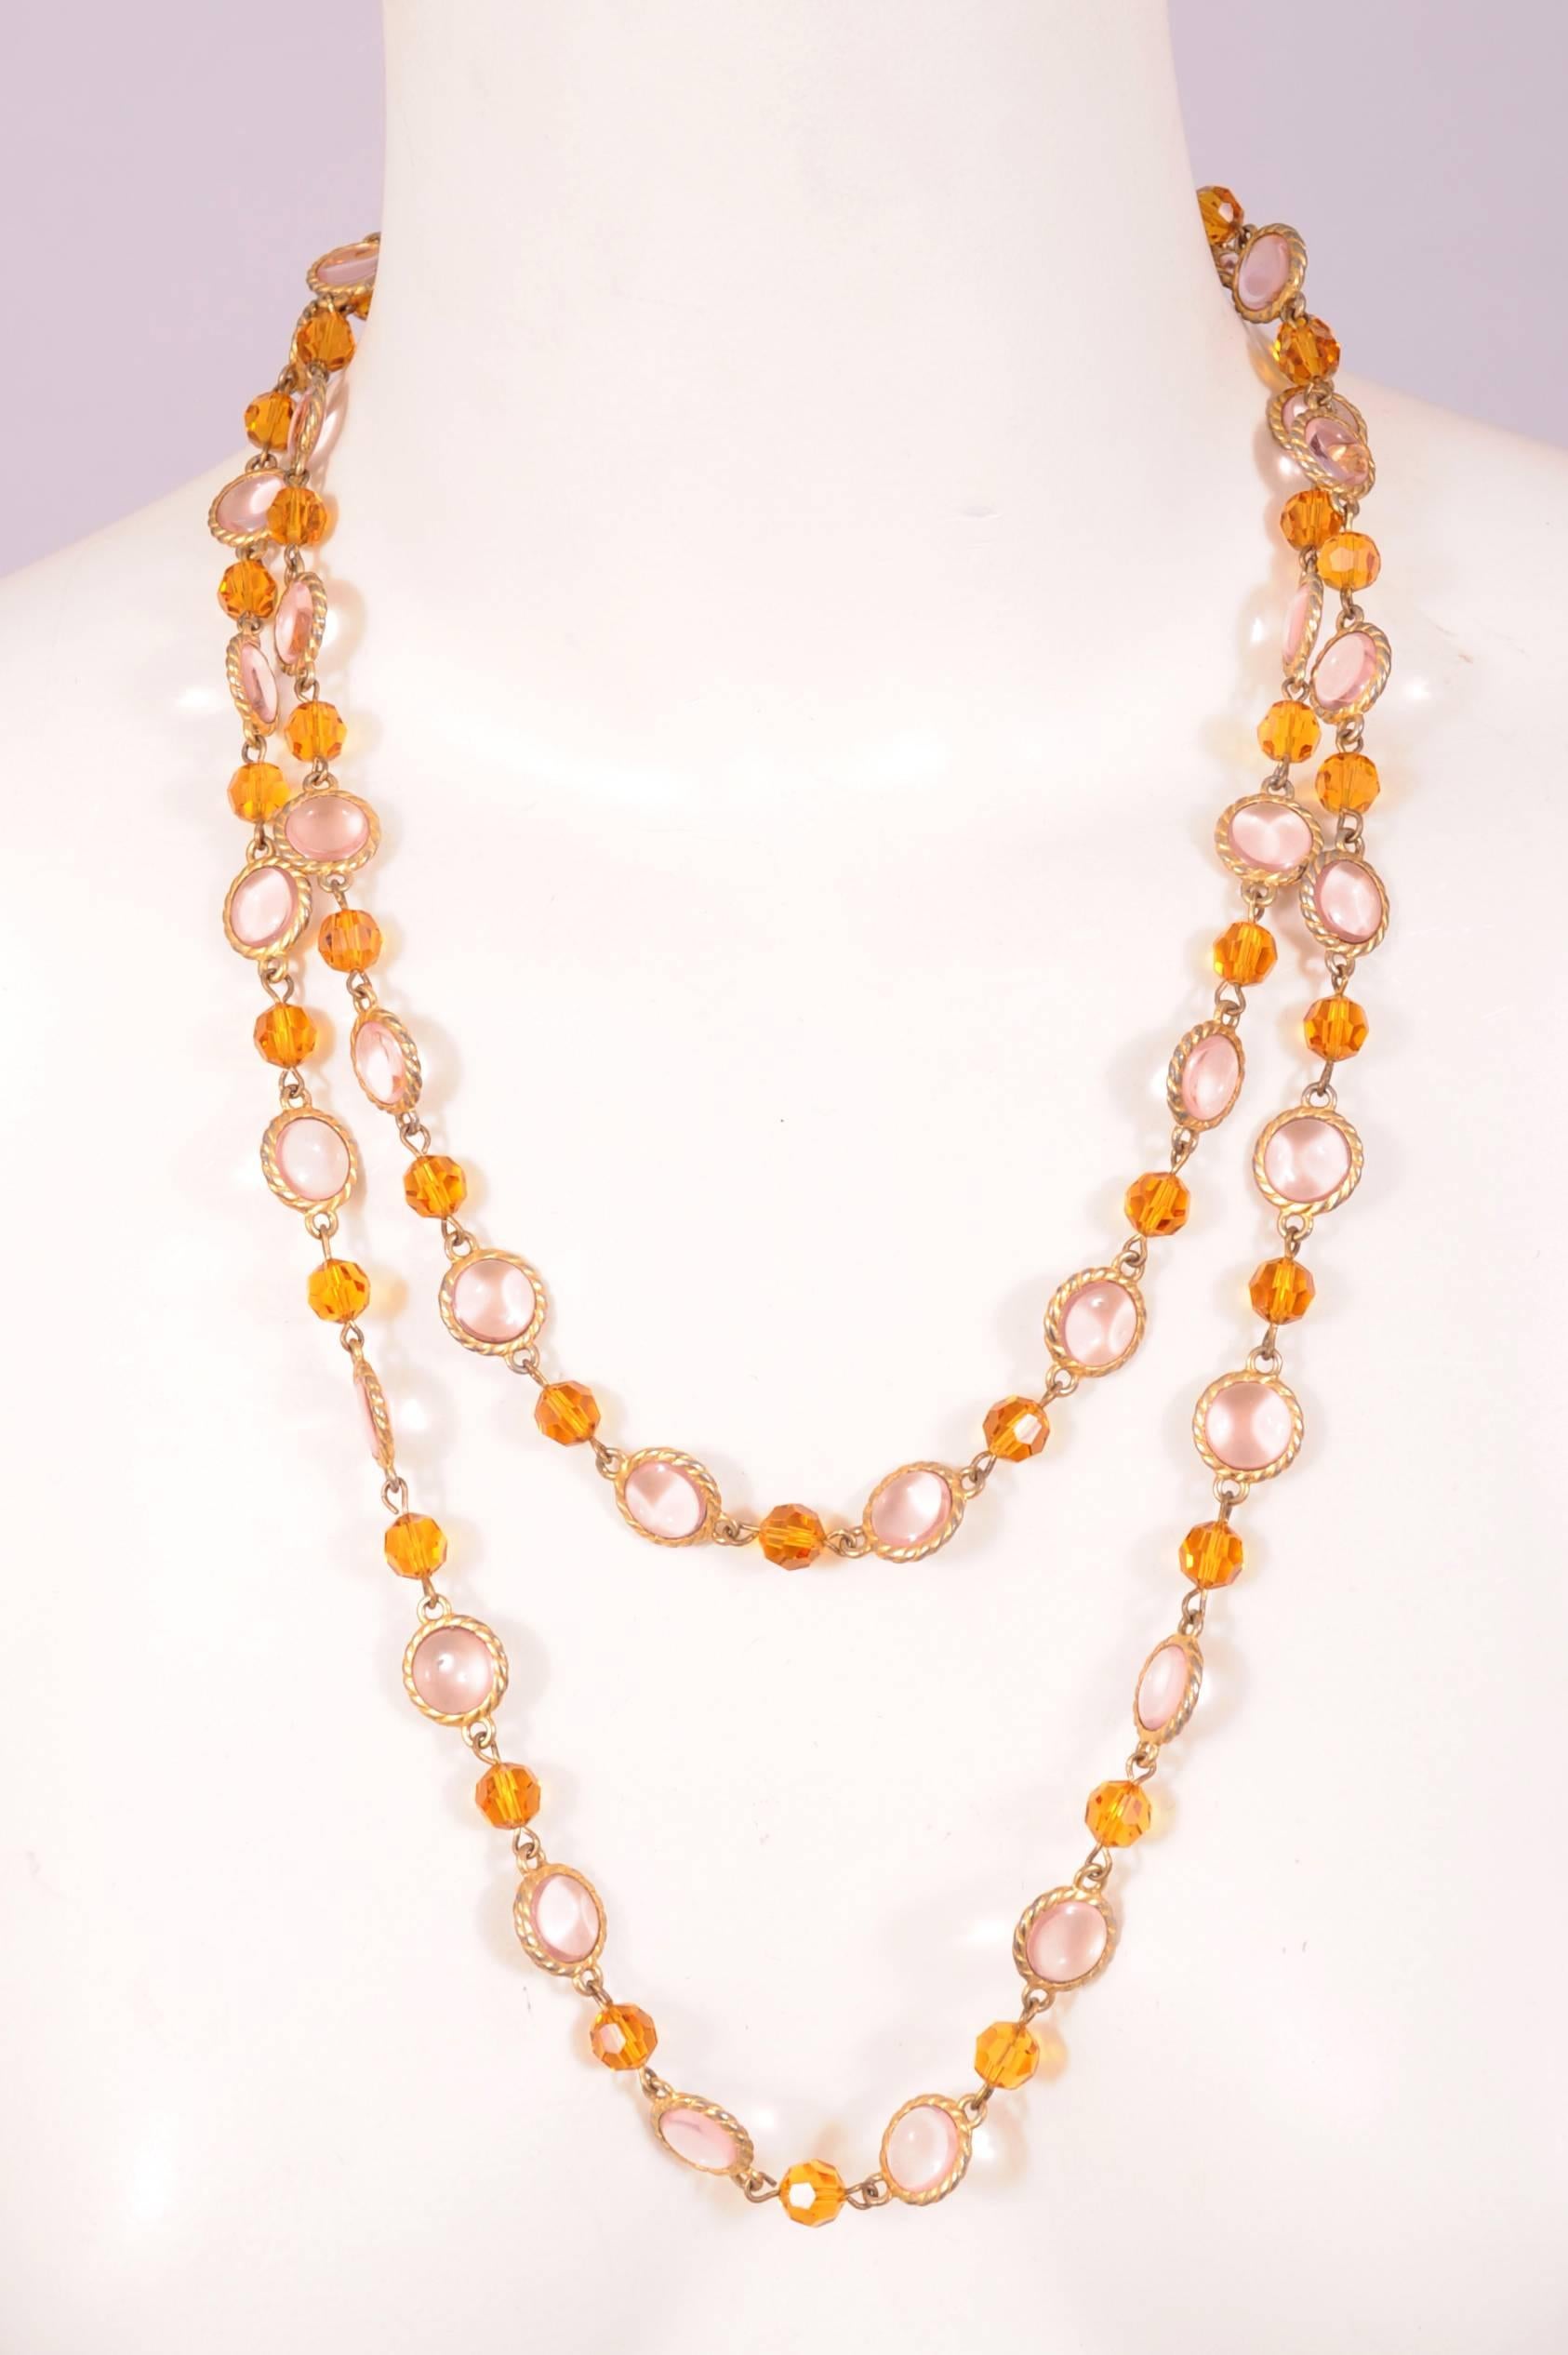 This necklace has pale pink cabochon stones and faceted gold stones on a gold toned metal link chain. It has a clasp so it can be worn doubled or tripled for different looks. The necklace is in excellent condition.
Measurements;
Length 50